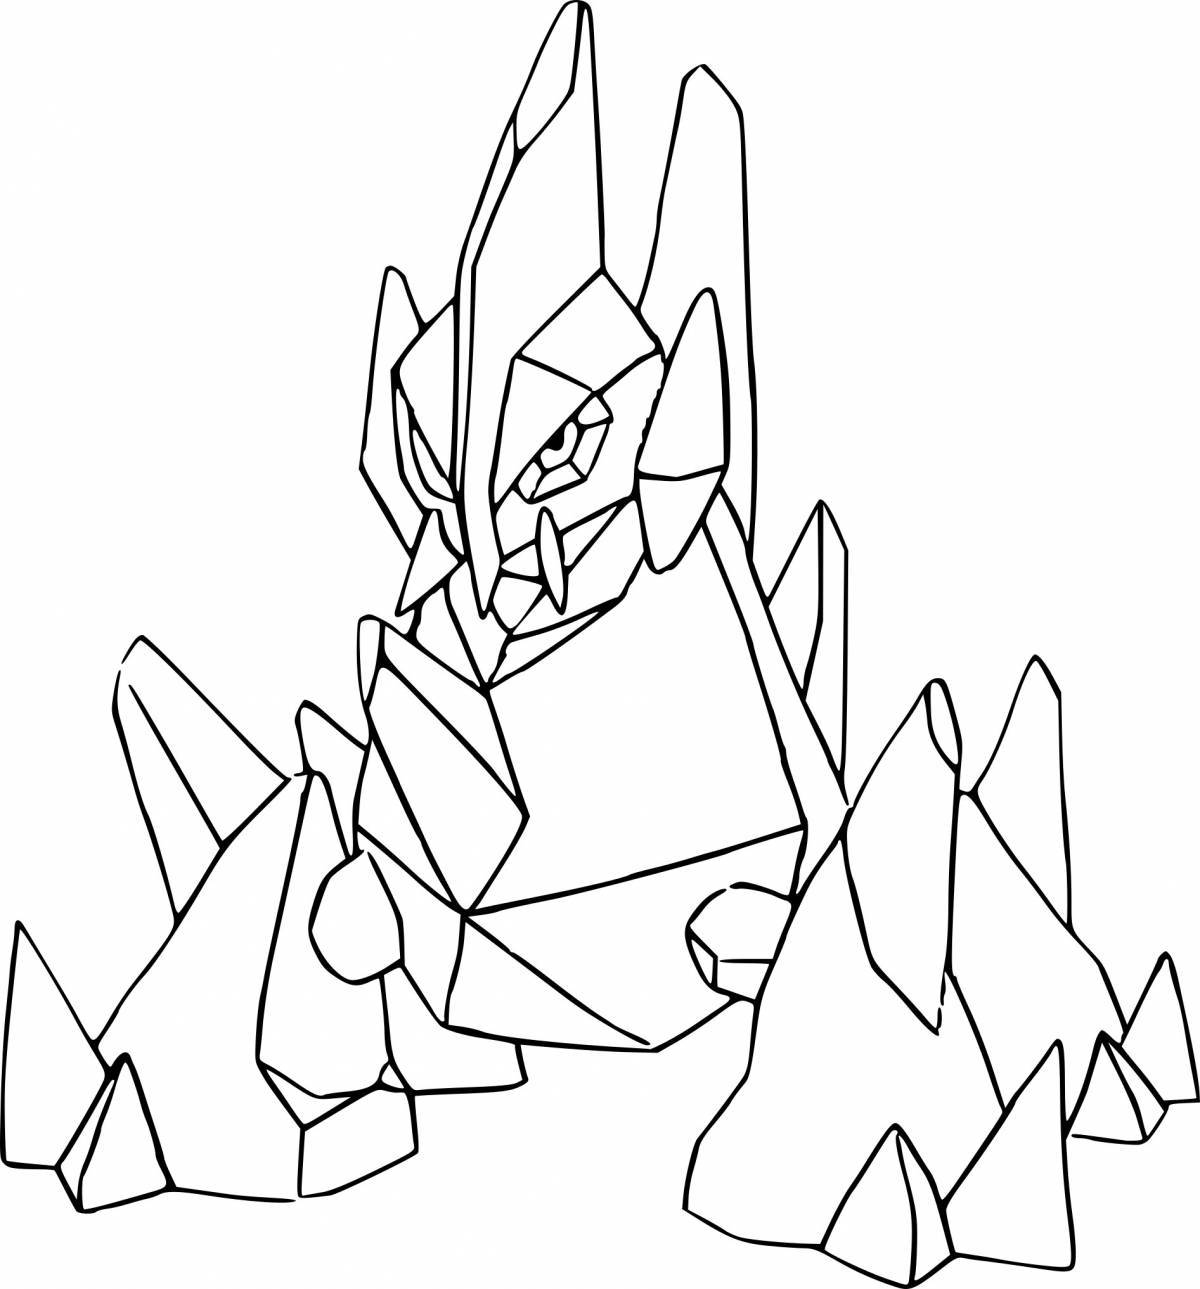 Coloring page of bright crystals